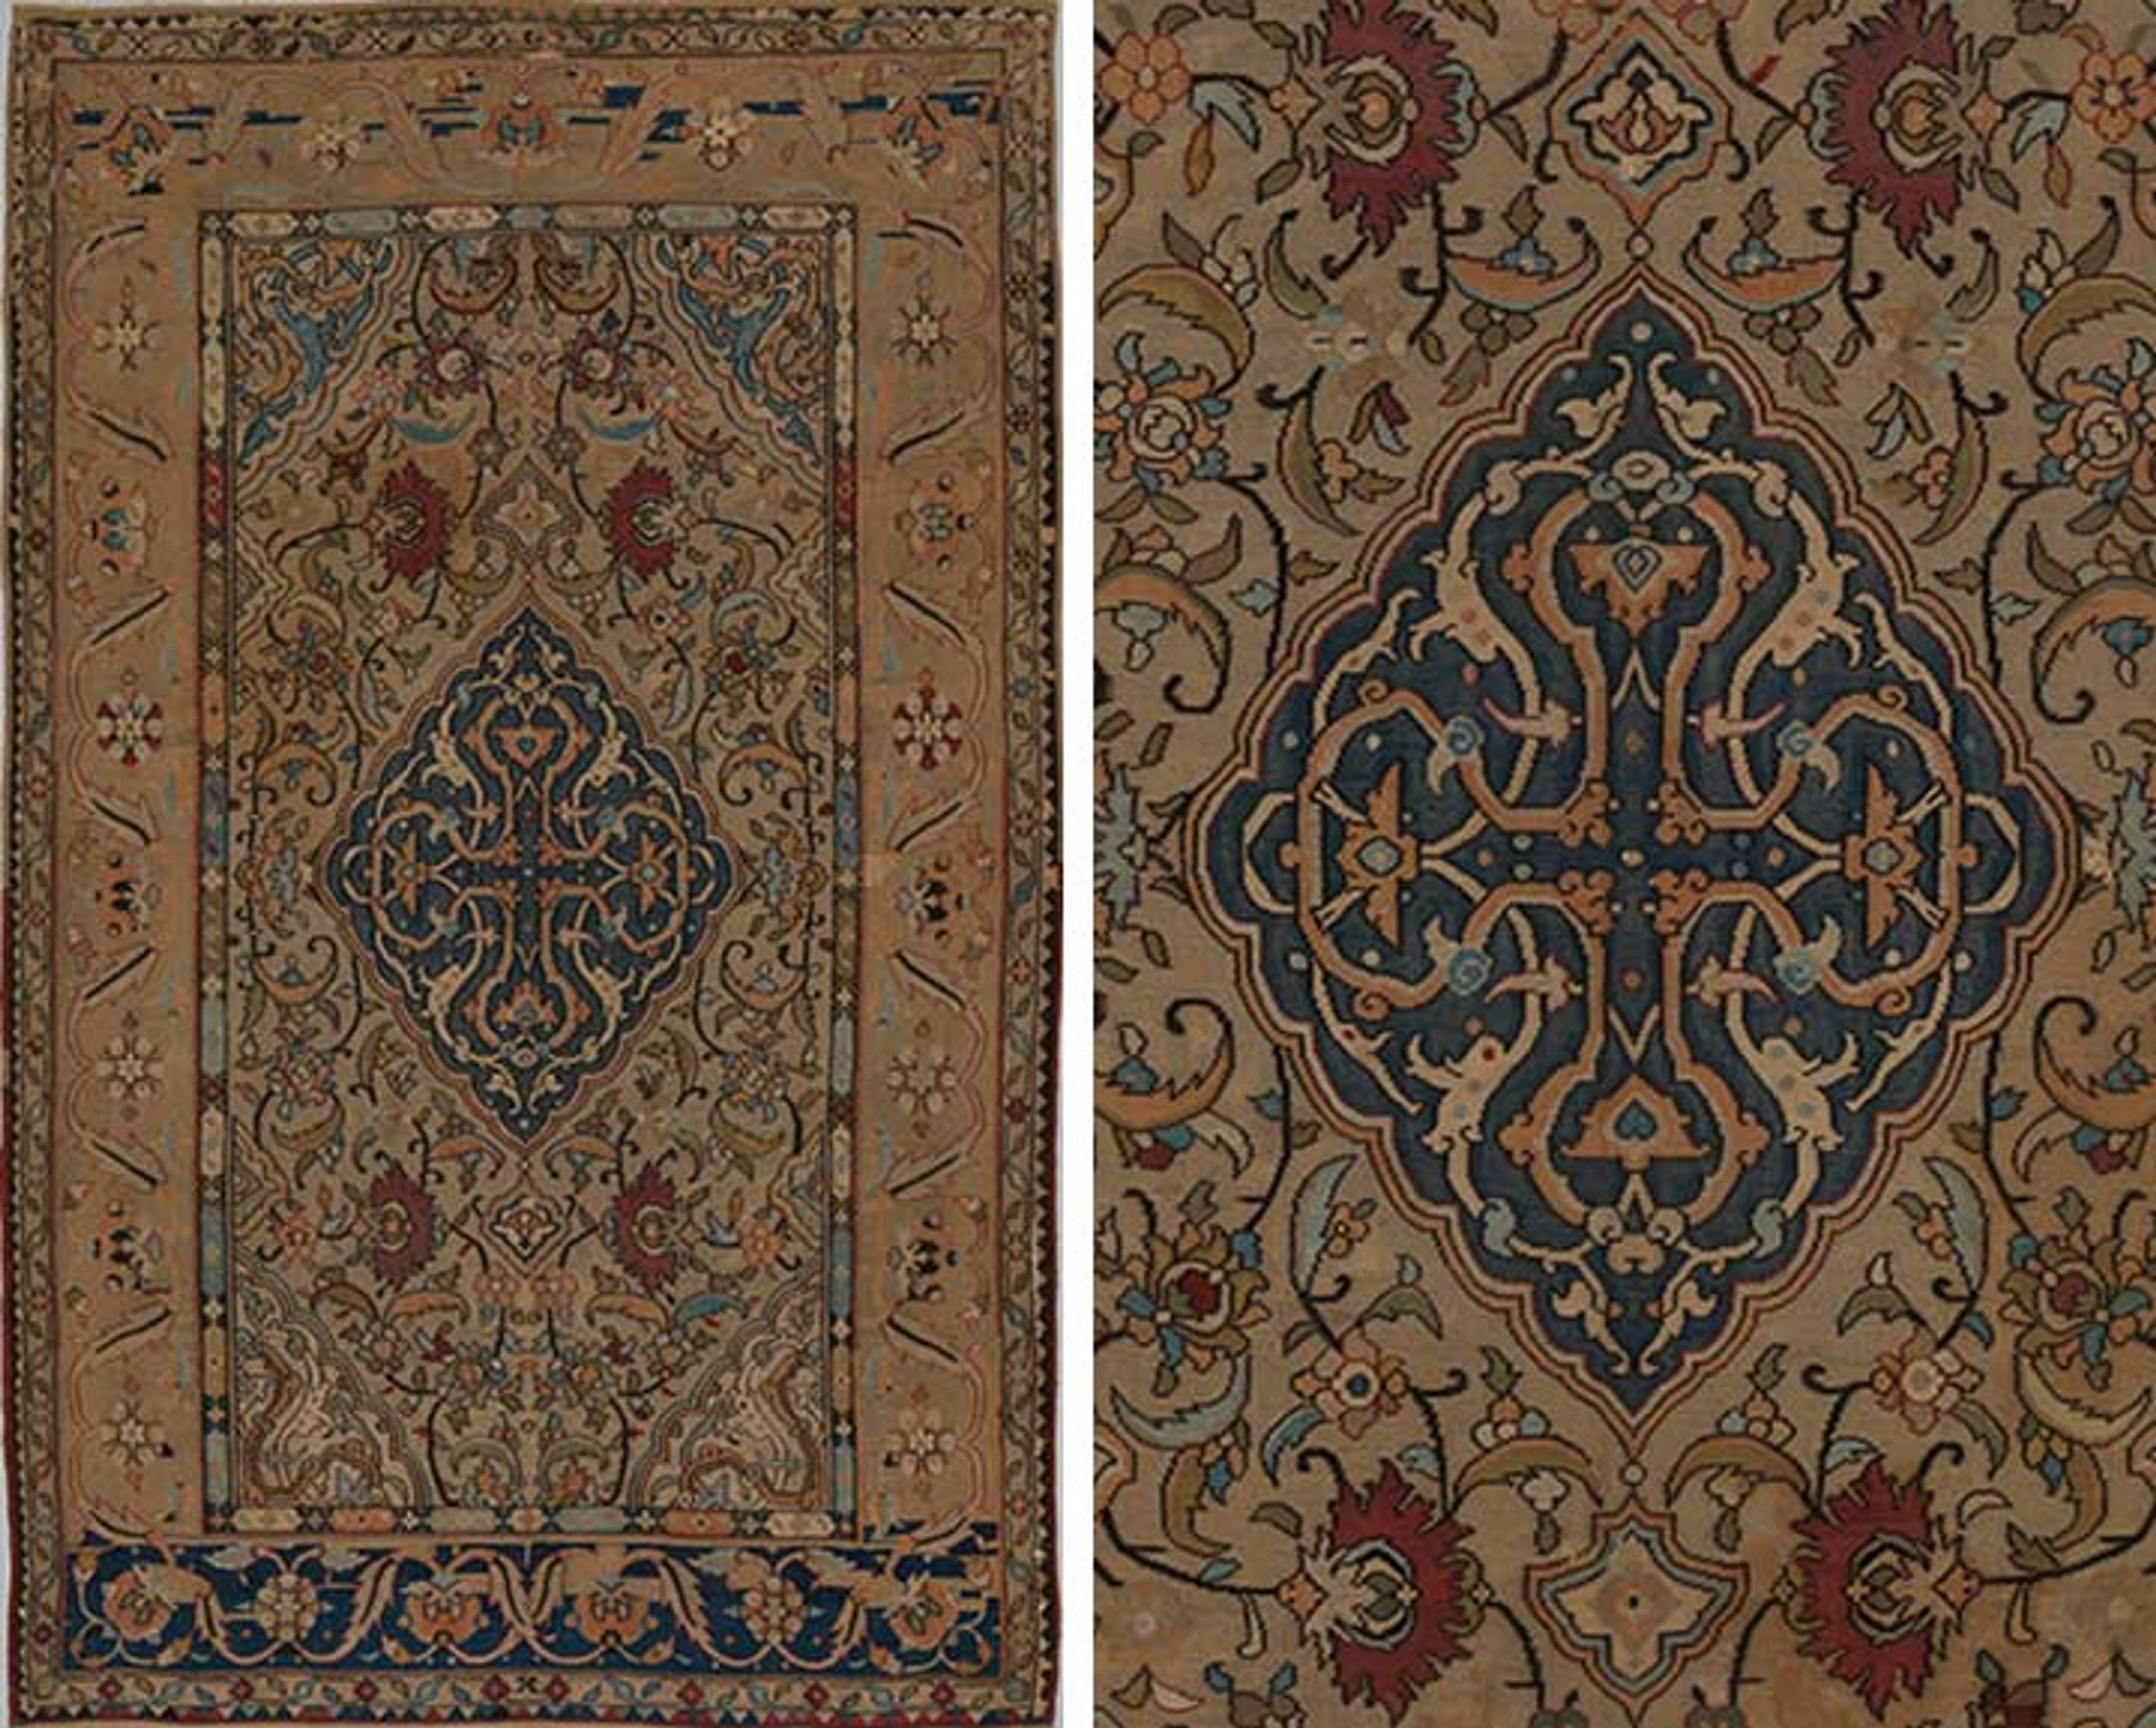 Carpets for Kings: Six Masterpieces of Iranian Weaving